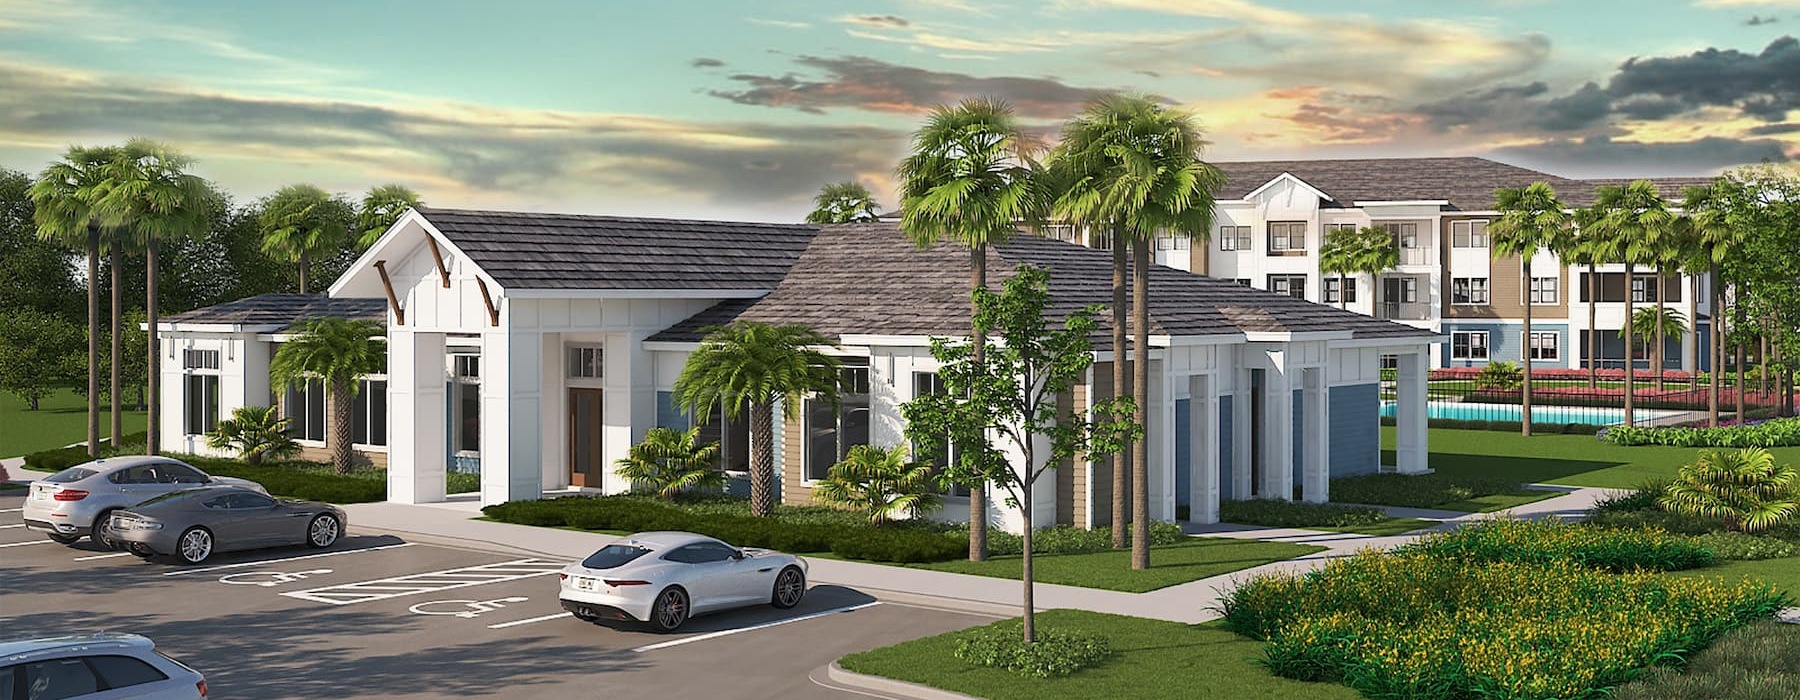 rendering of property exterior with outside areas of greenery